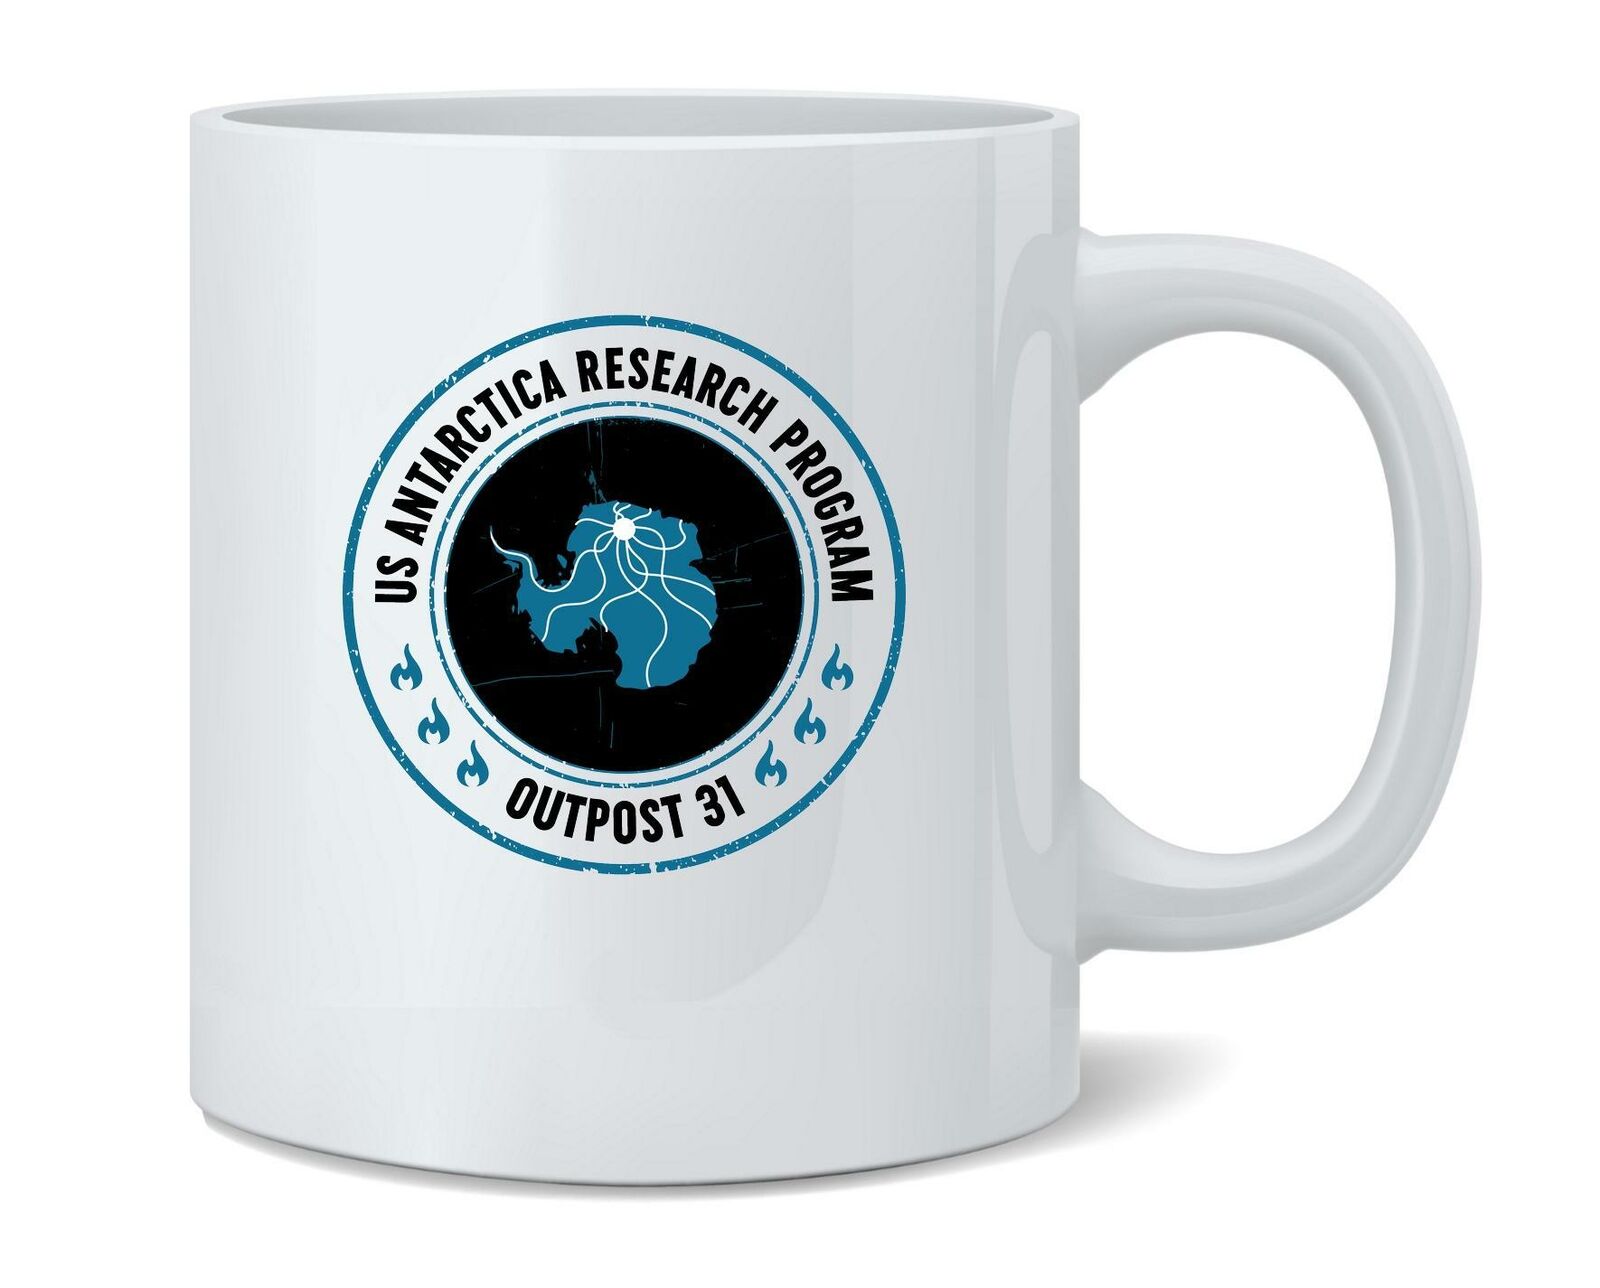 Outpost 31 US Antarctica Research 80s Horror Movie Classic Coffee Mug Tea Cup